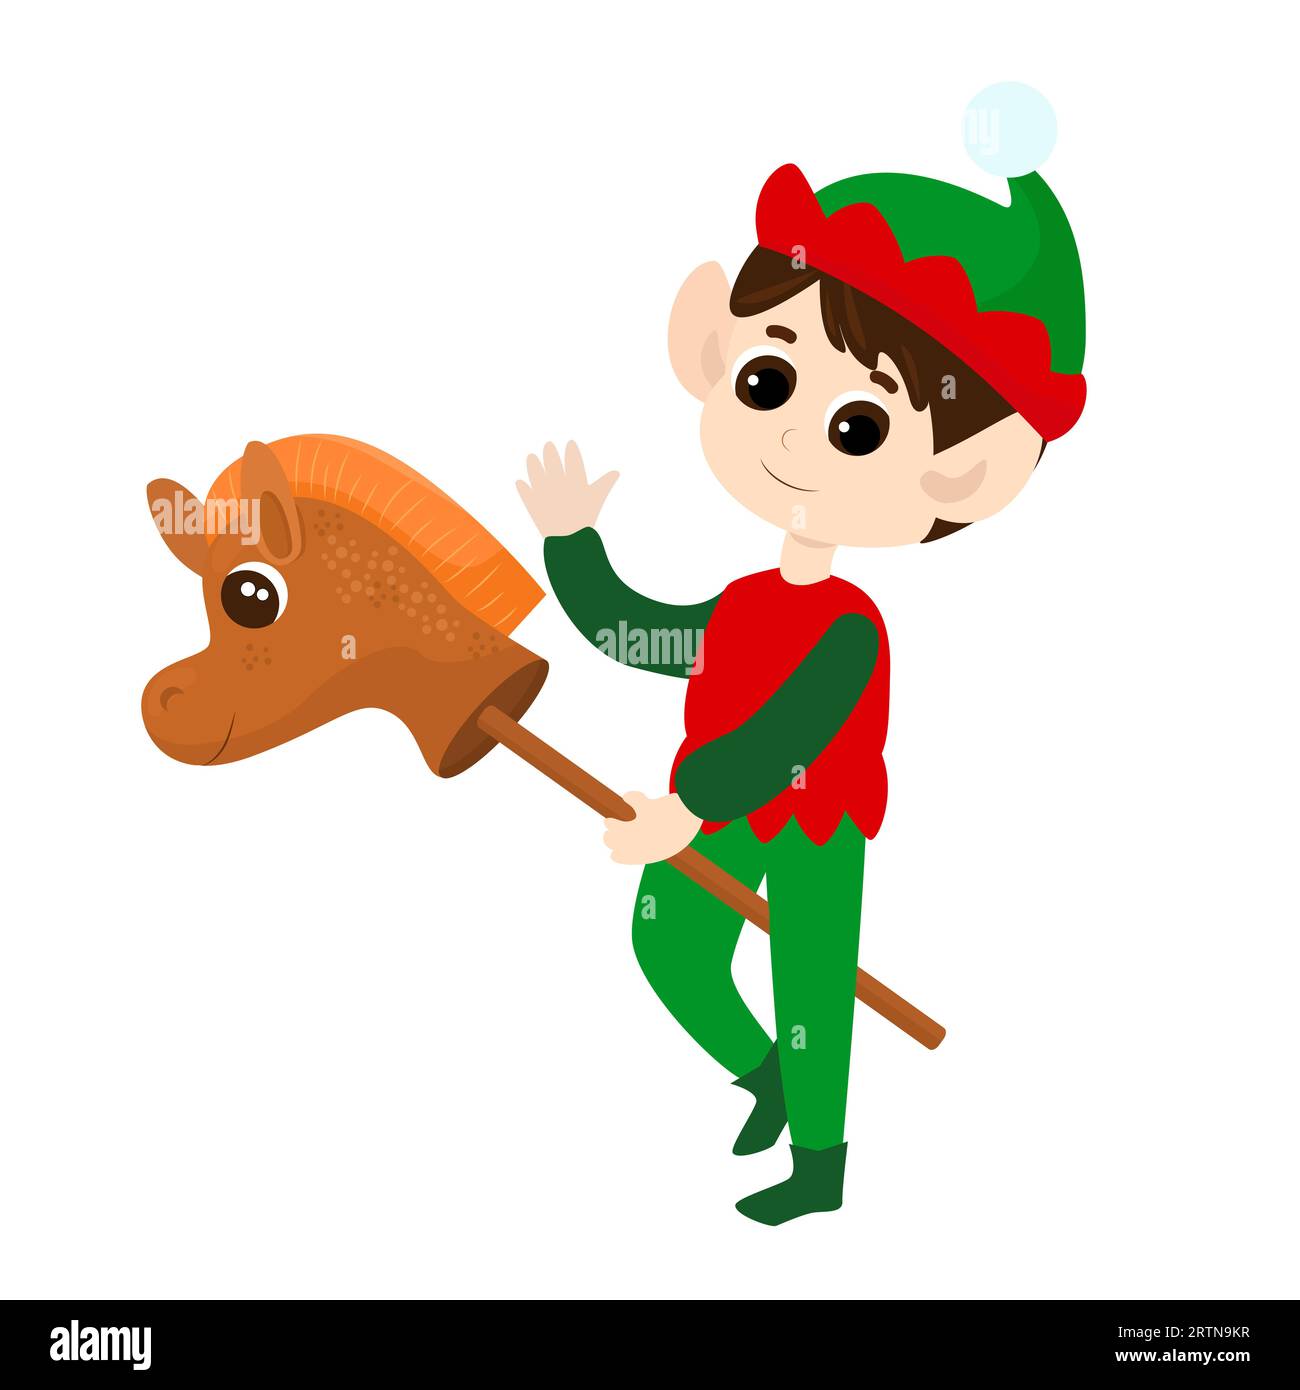 An elf rides a toy horse on a stick. The boy waves hello he is happy. The child is wearing traditional elf clothing. Cartoon Christmas illustration. Stock Vector